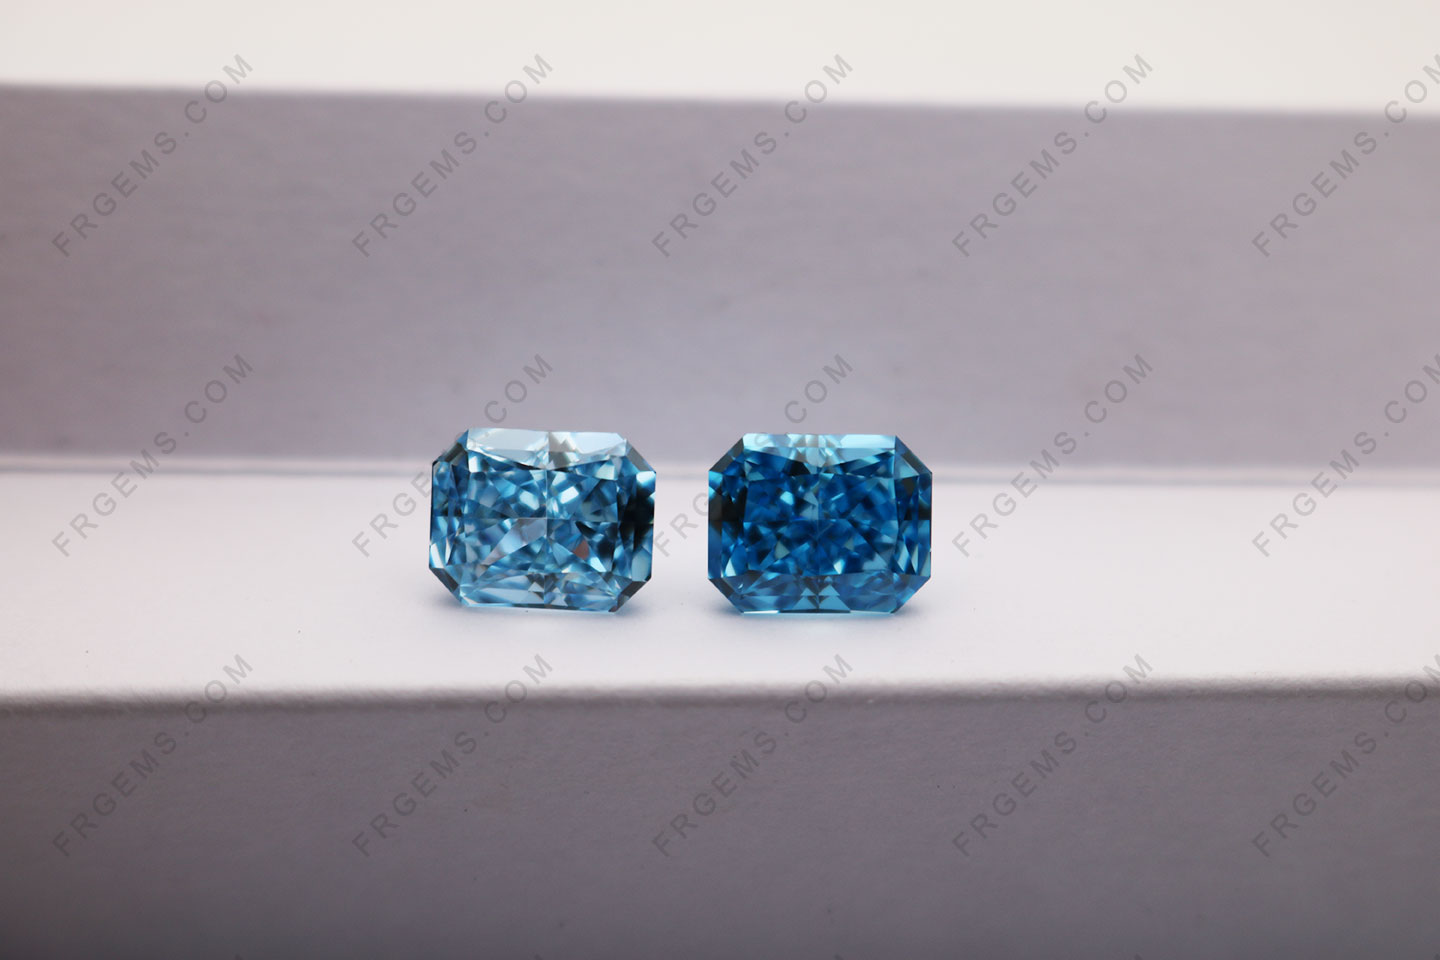 Loose Cubic Zirconia Fancy Blue Dark and light Color Octagon Shaped Crushed Ice Cut 12x10mm Gemstones